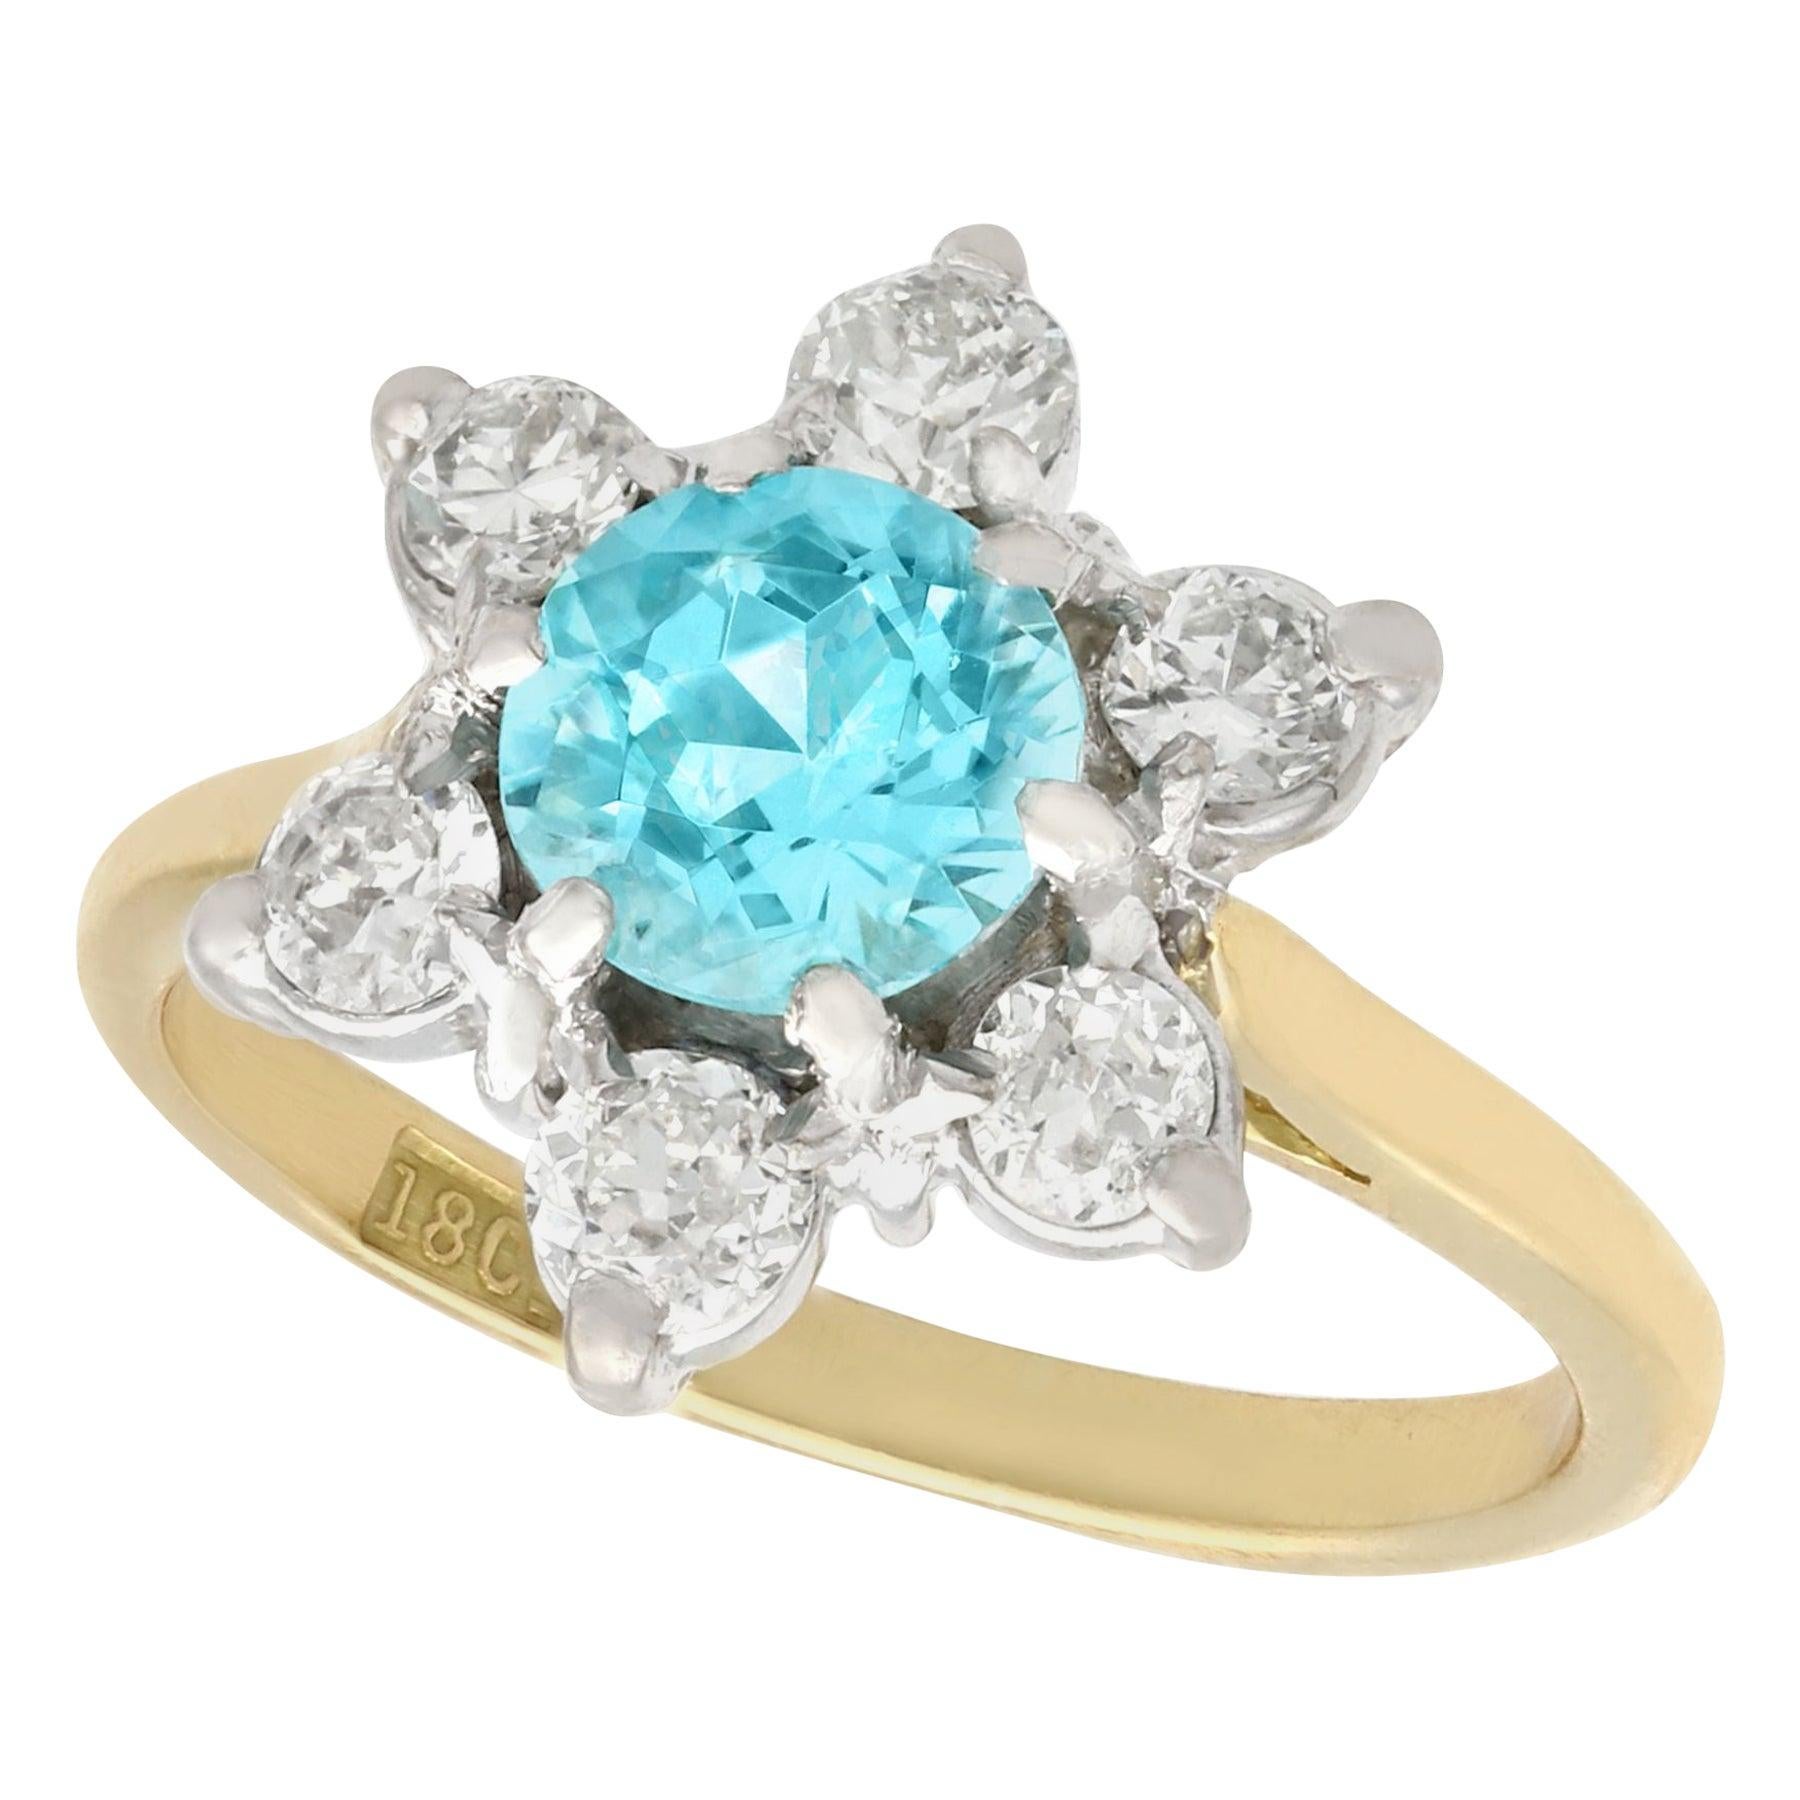 Antique 1920s 1.18 Carat Blue Zircon and Diamond Yellow Gold Cluster Ring